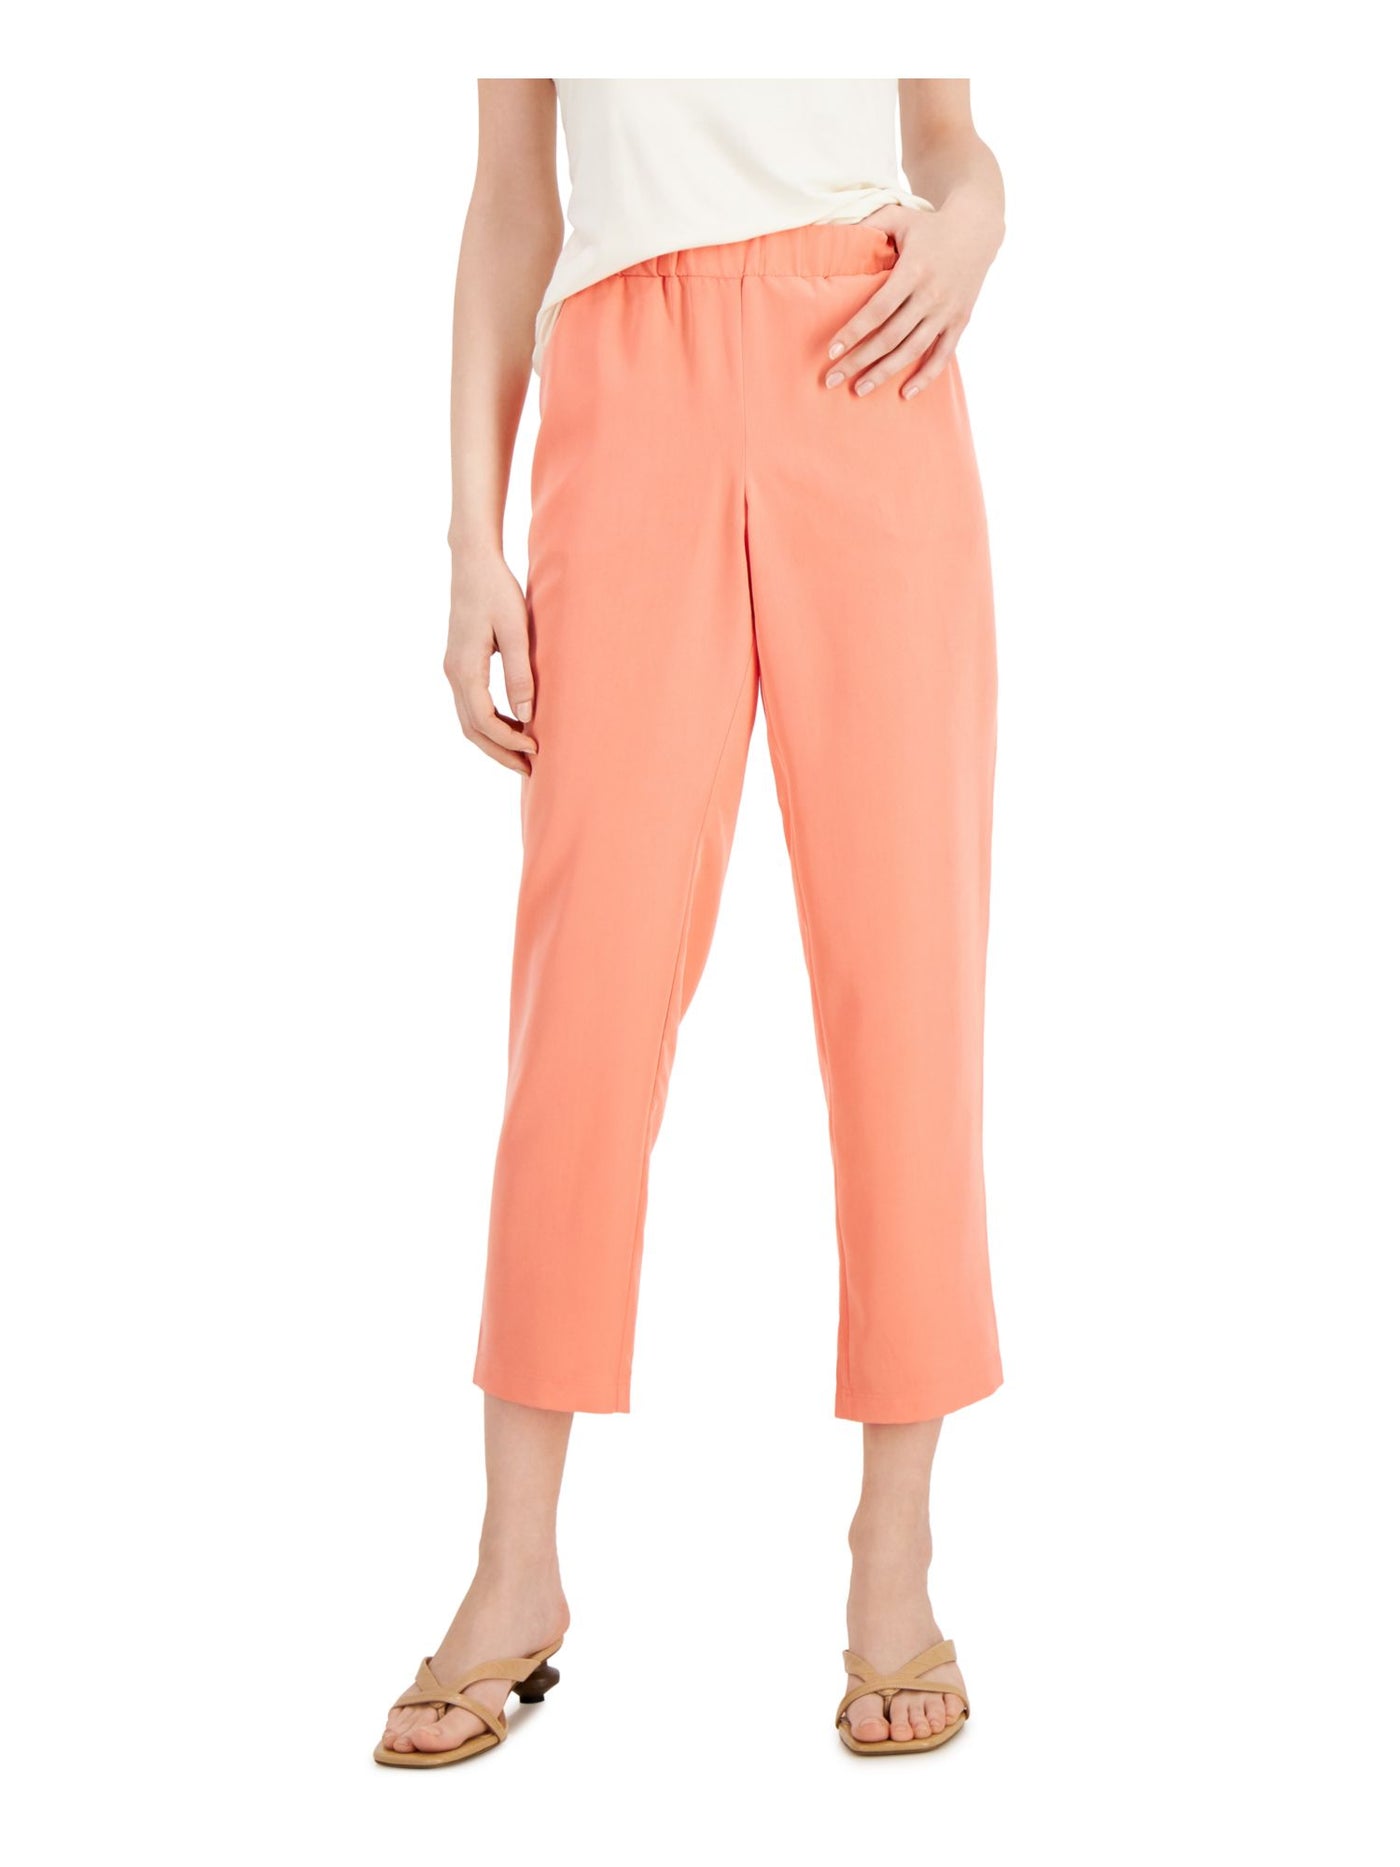 ALFANI Womens Orange Stretch Pocketed Elastic Waist Pull On Ankle Cropped Pants S